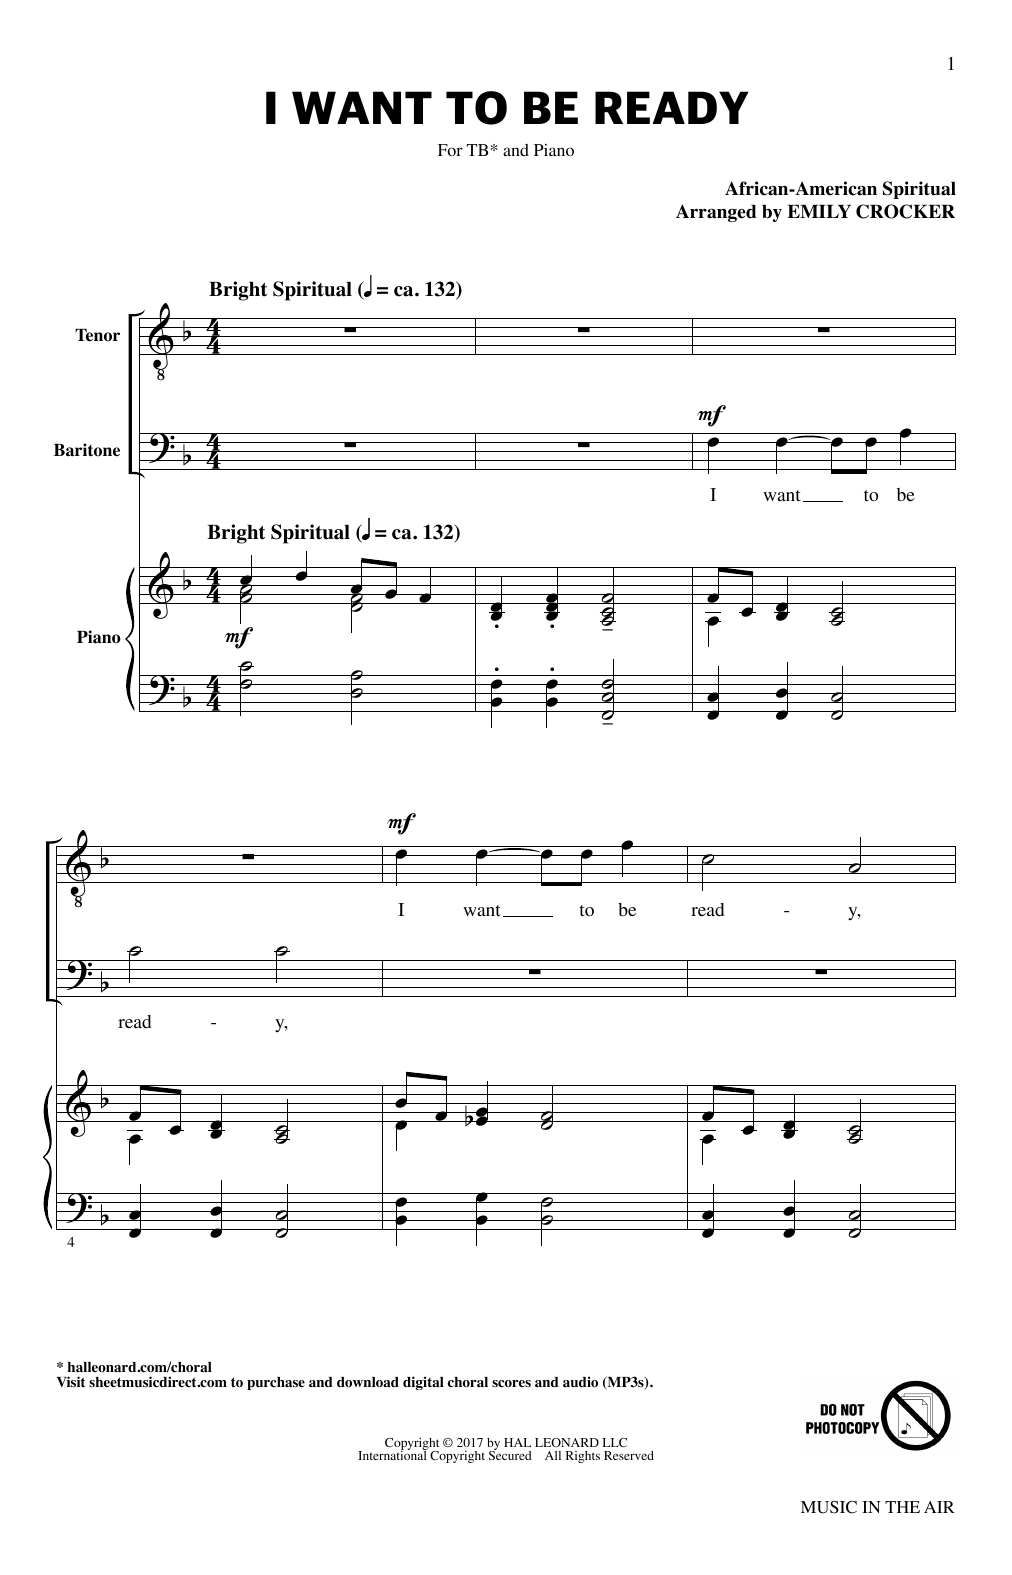 Emily Crocker I Want To Be Ready (from Music In The Air) sheet music notes and chords. Download Printable PDF.